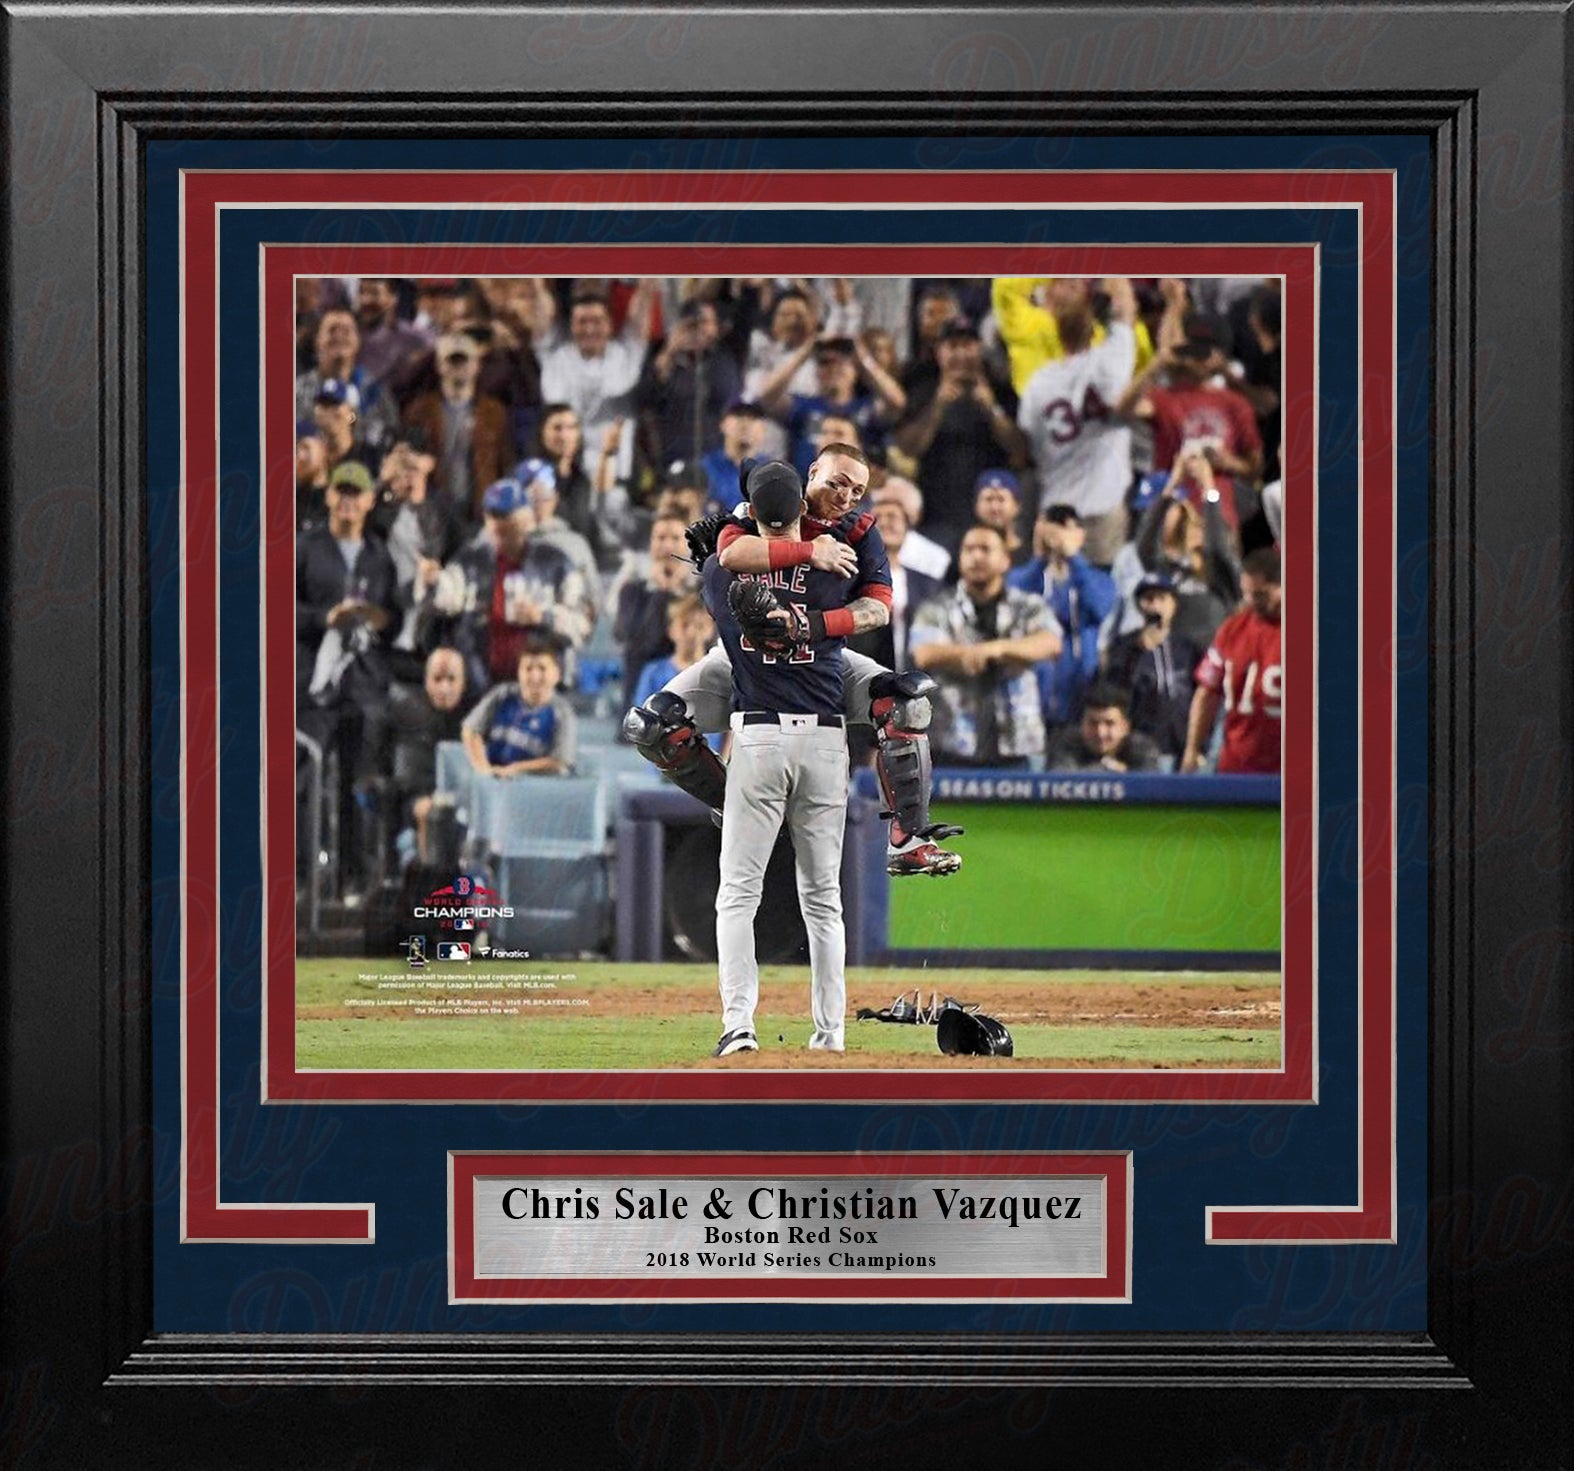 Chris Sale & Christian Vazquez Boston Red Sox 2018 World Series Final Out 8" x 10" Framed Photo - Dynasty Sports & Framing 